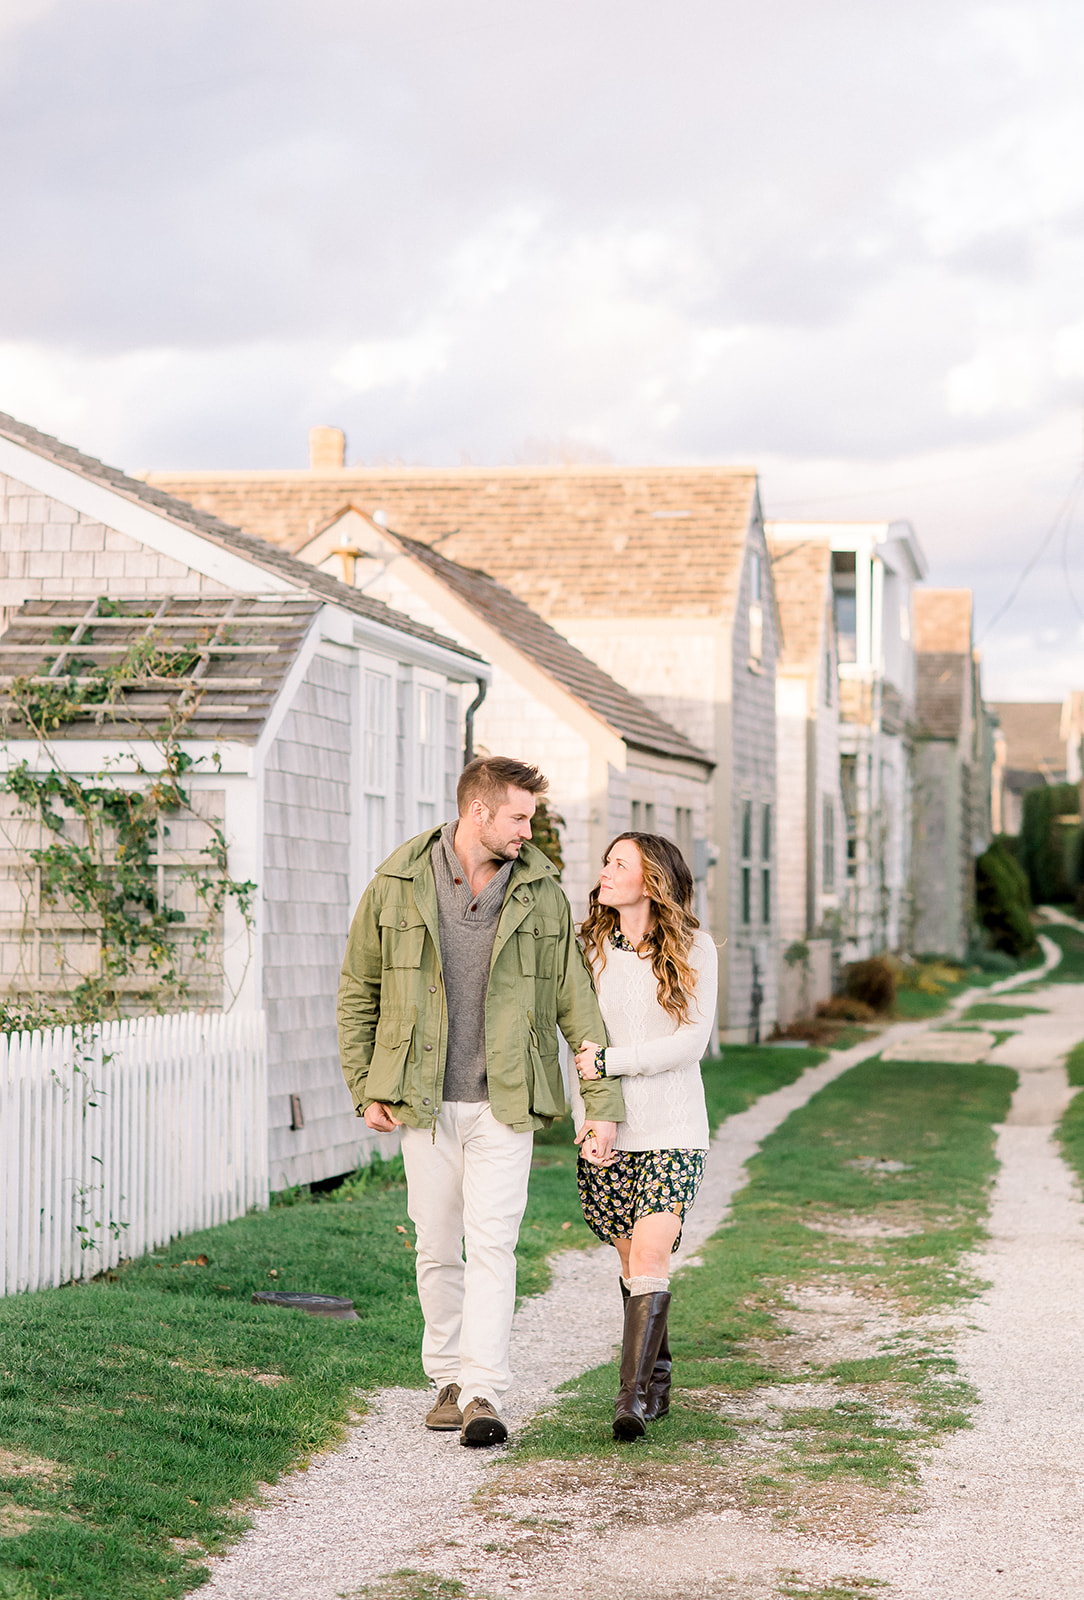 Nantucket Couples Photography and Marriage Advice